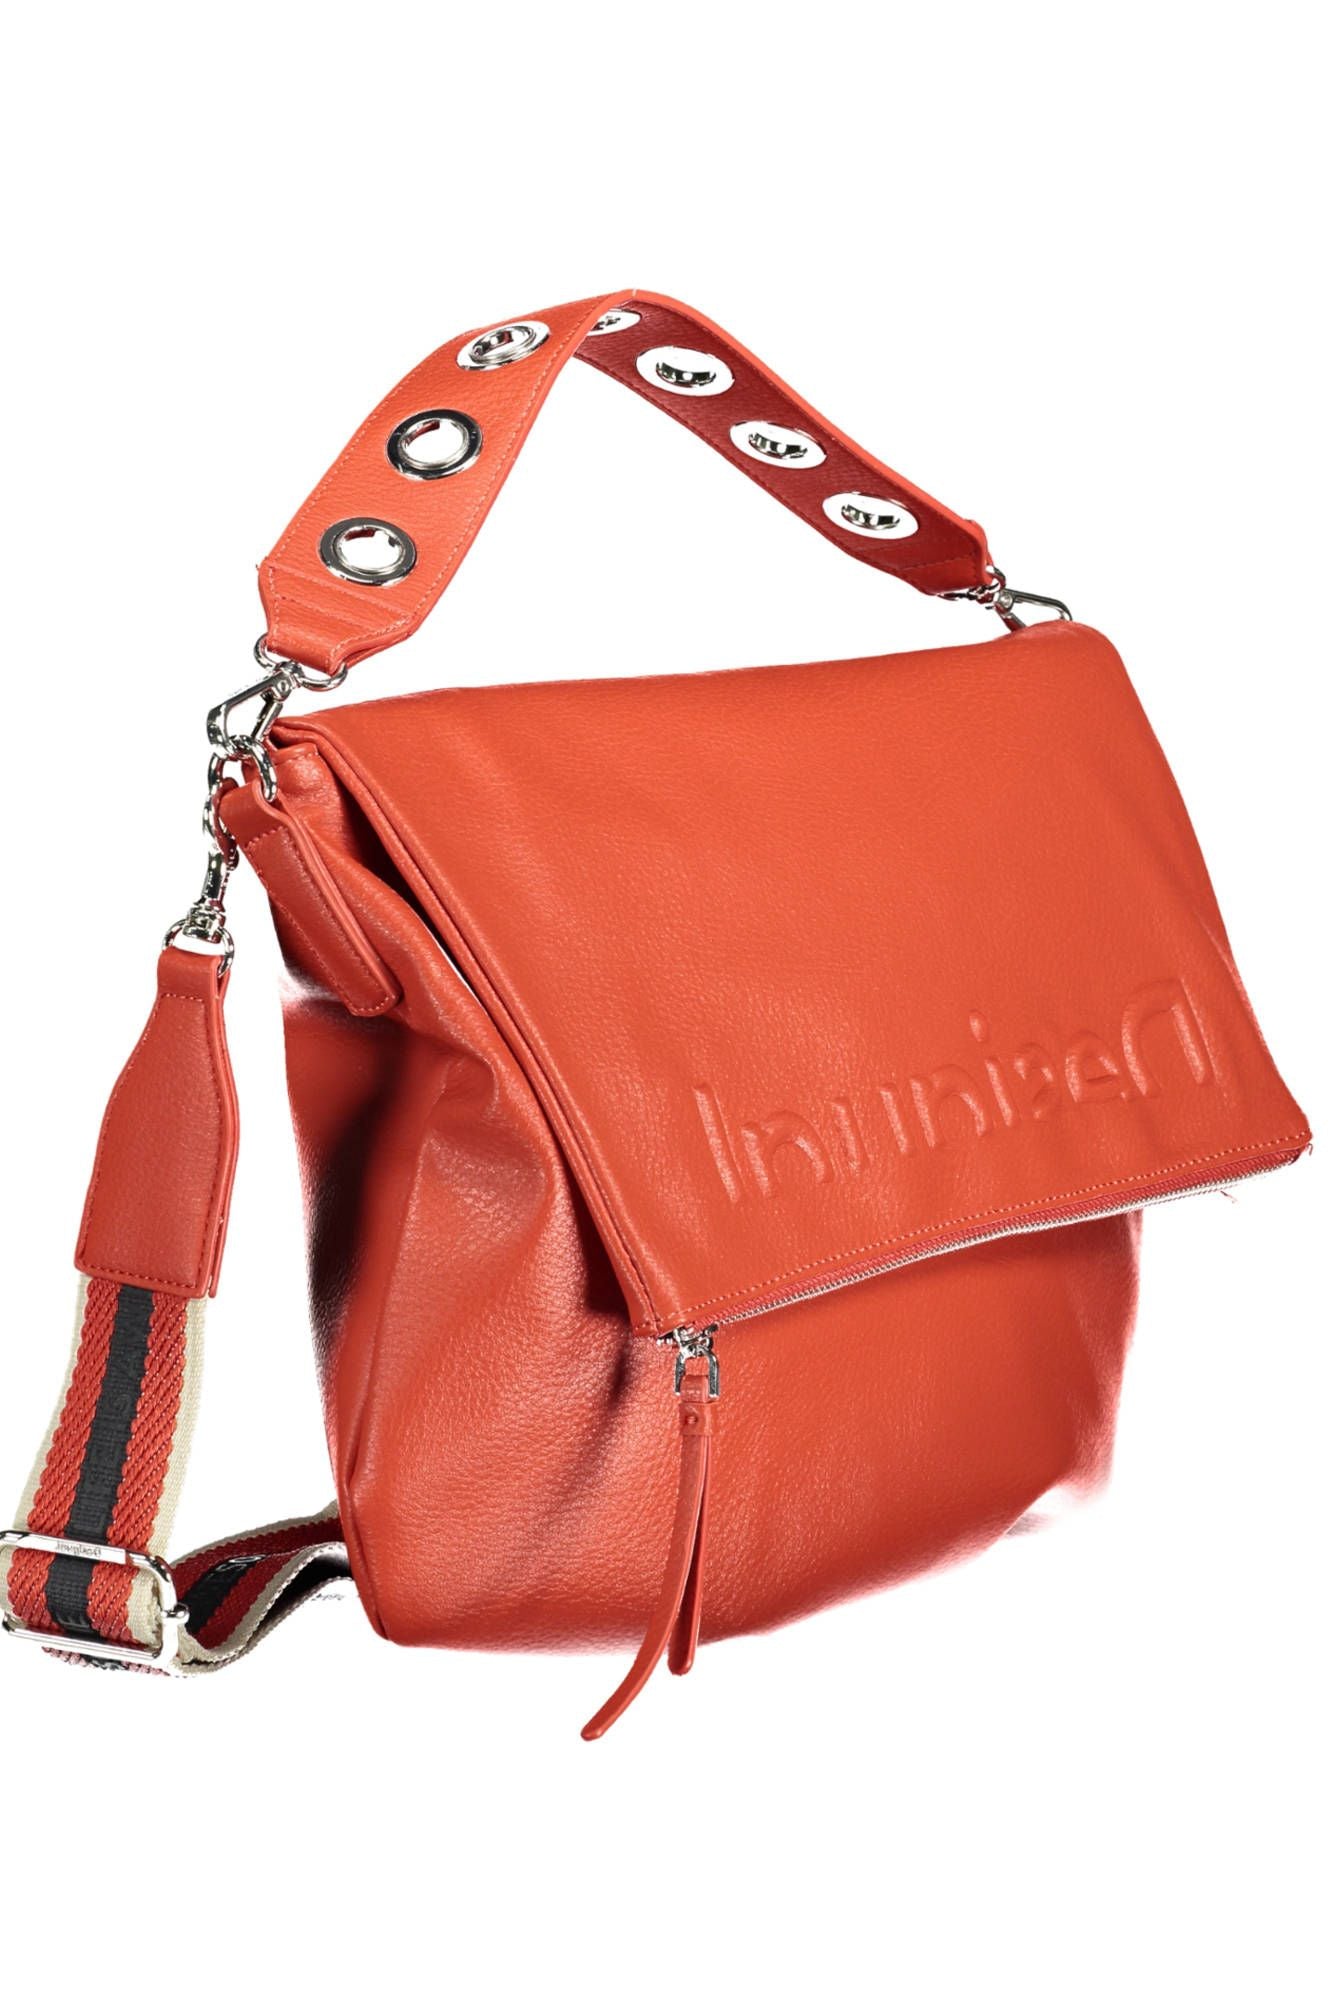 Chic Red Contrasting Detail Satchel